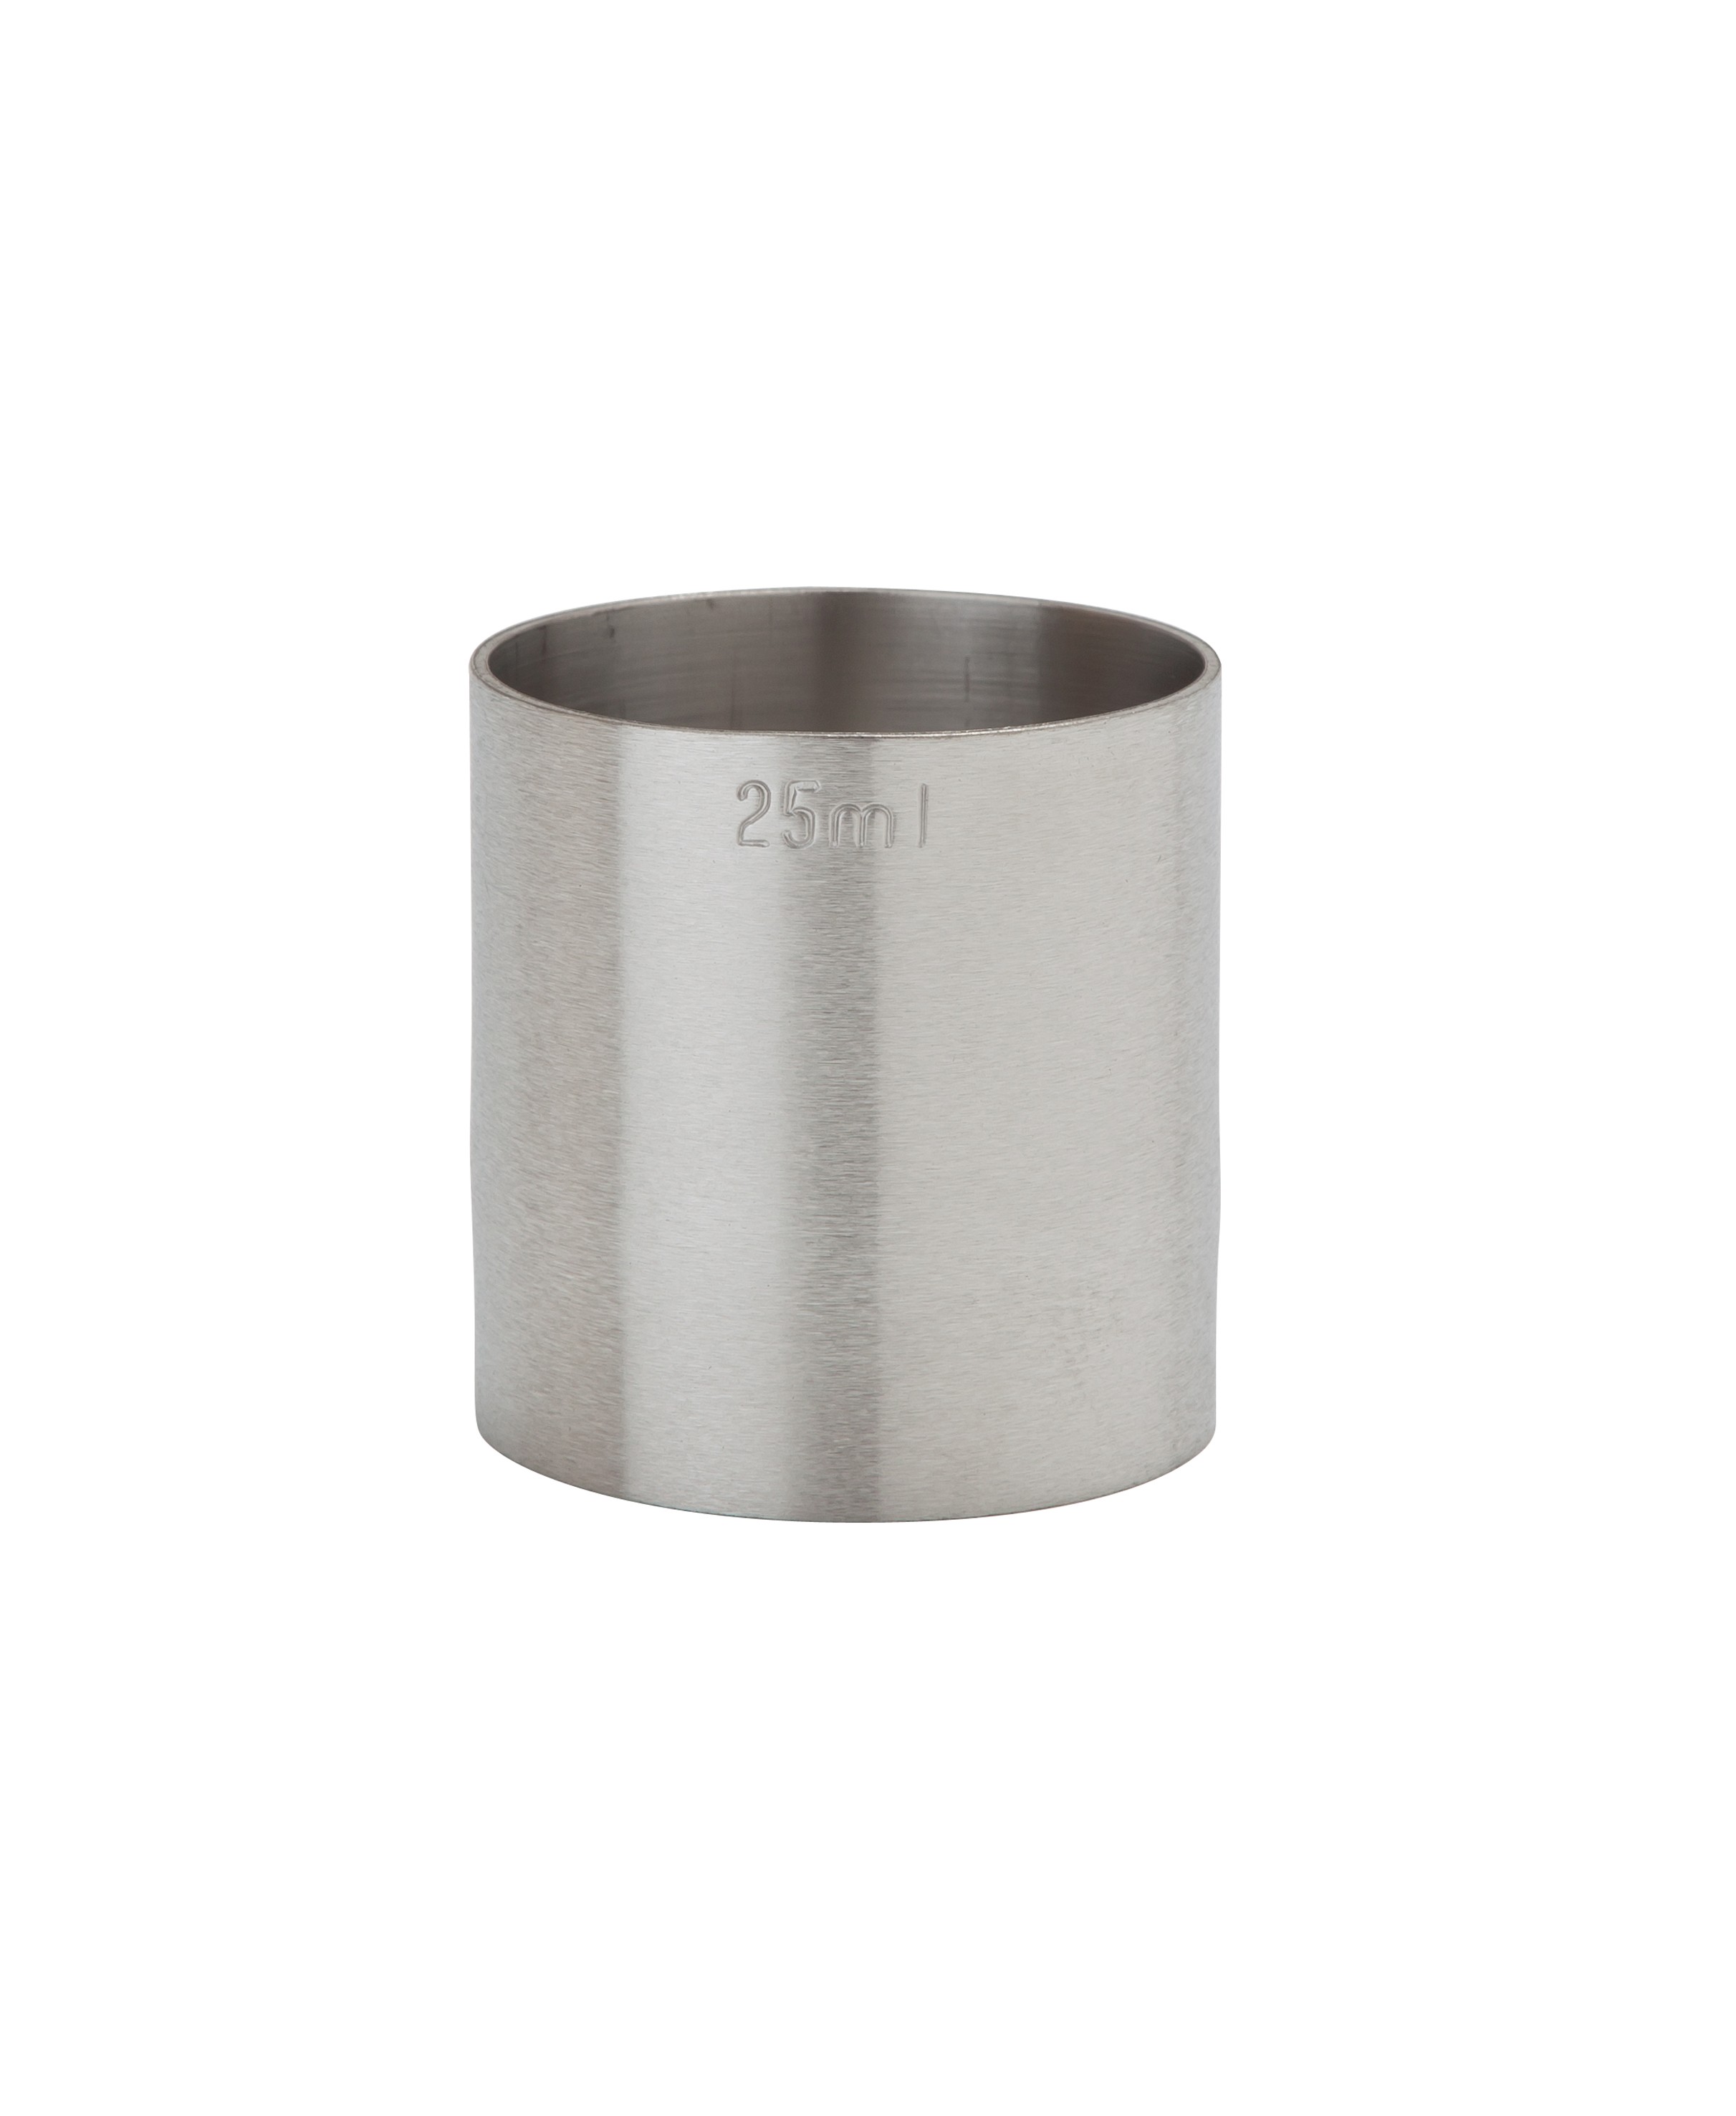 Stainless Steel Thimble Measure CE 25ml 